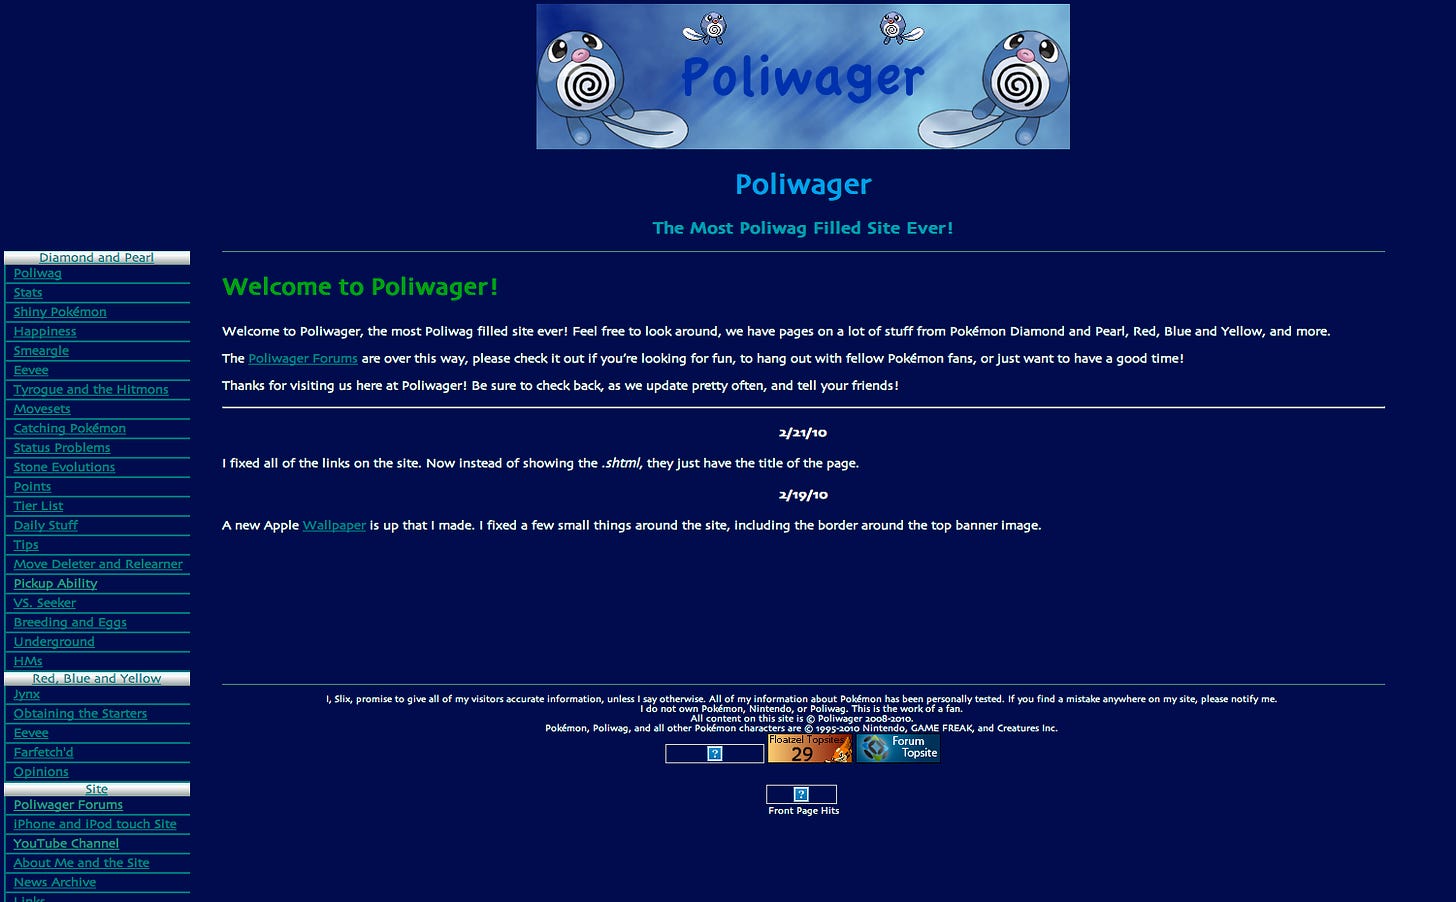 An early version of the Poliwager website from February 2010